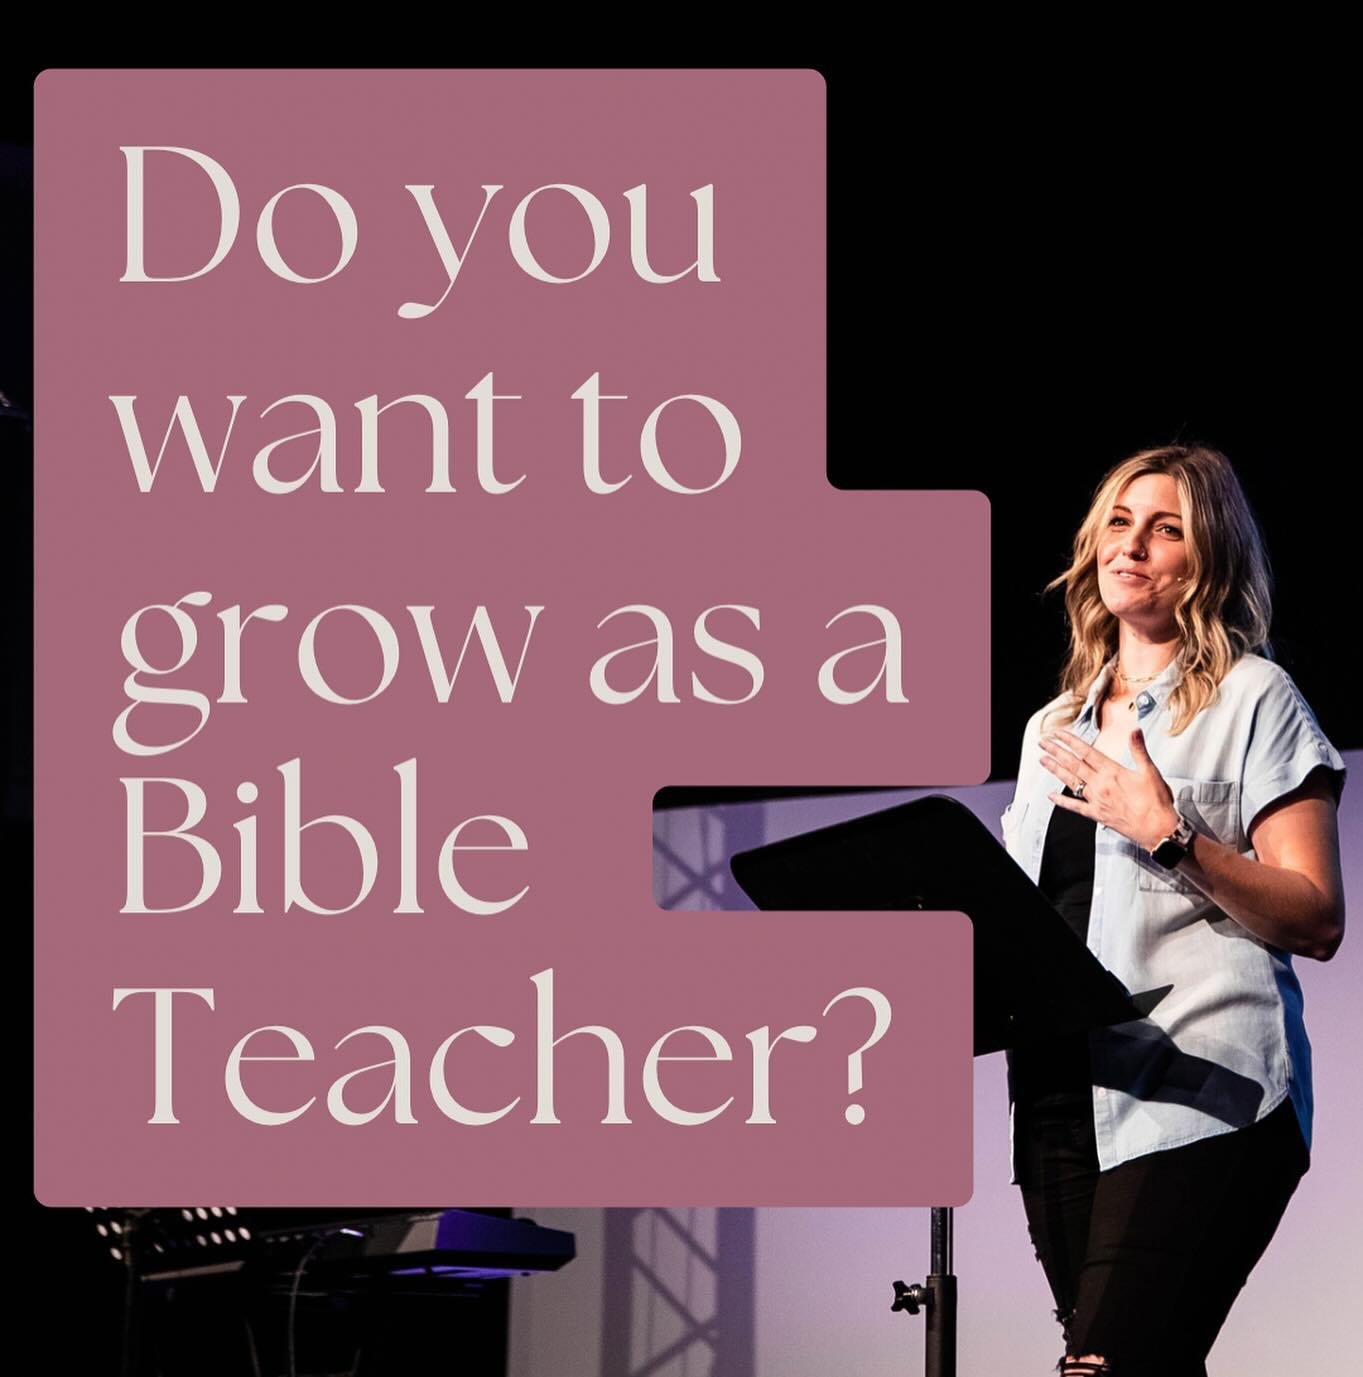 For the last 5 years, my friend @lindsayschottwatercolor and I have been building a teacher training program at our church, @stonegatechurch. We believe the local church is stronger when the women within it are equipped to rightly handle God&rsquo;s 